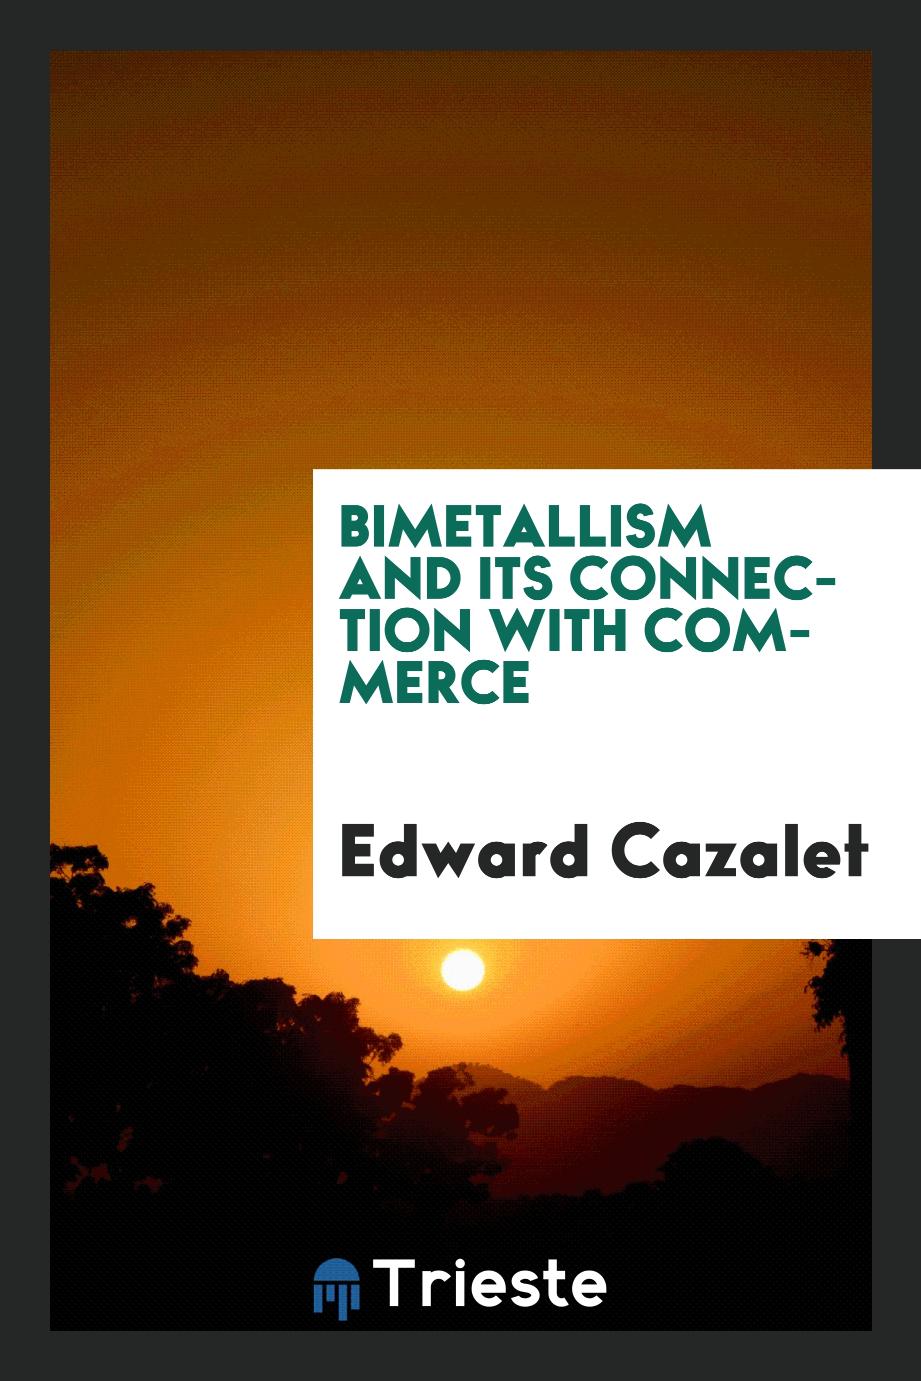 Bimetallism and its connection with commerce